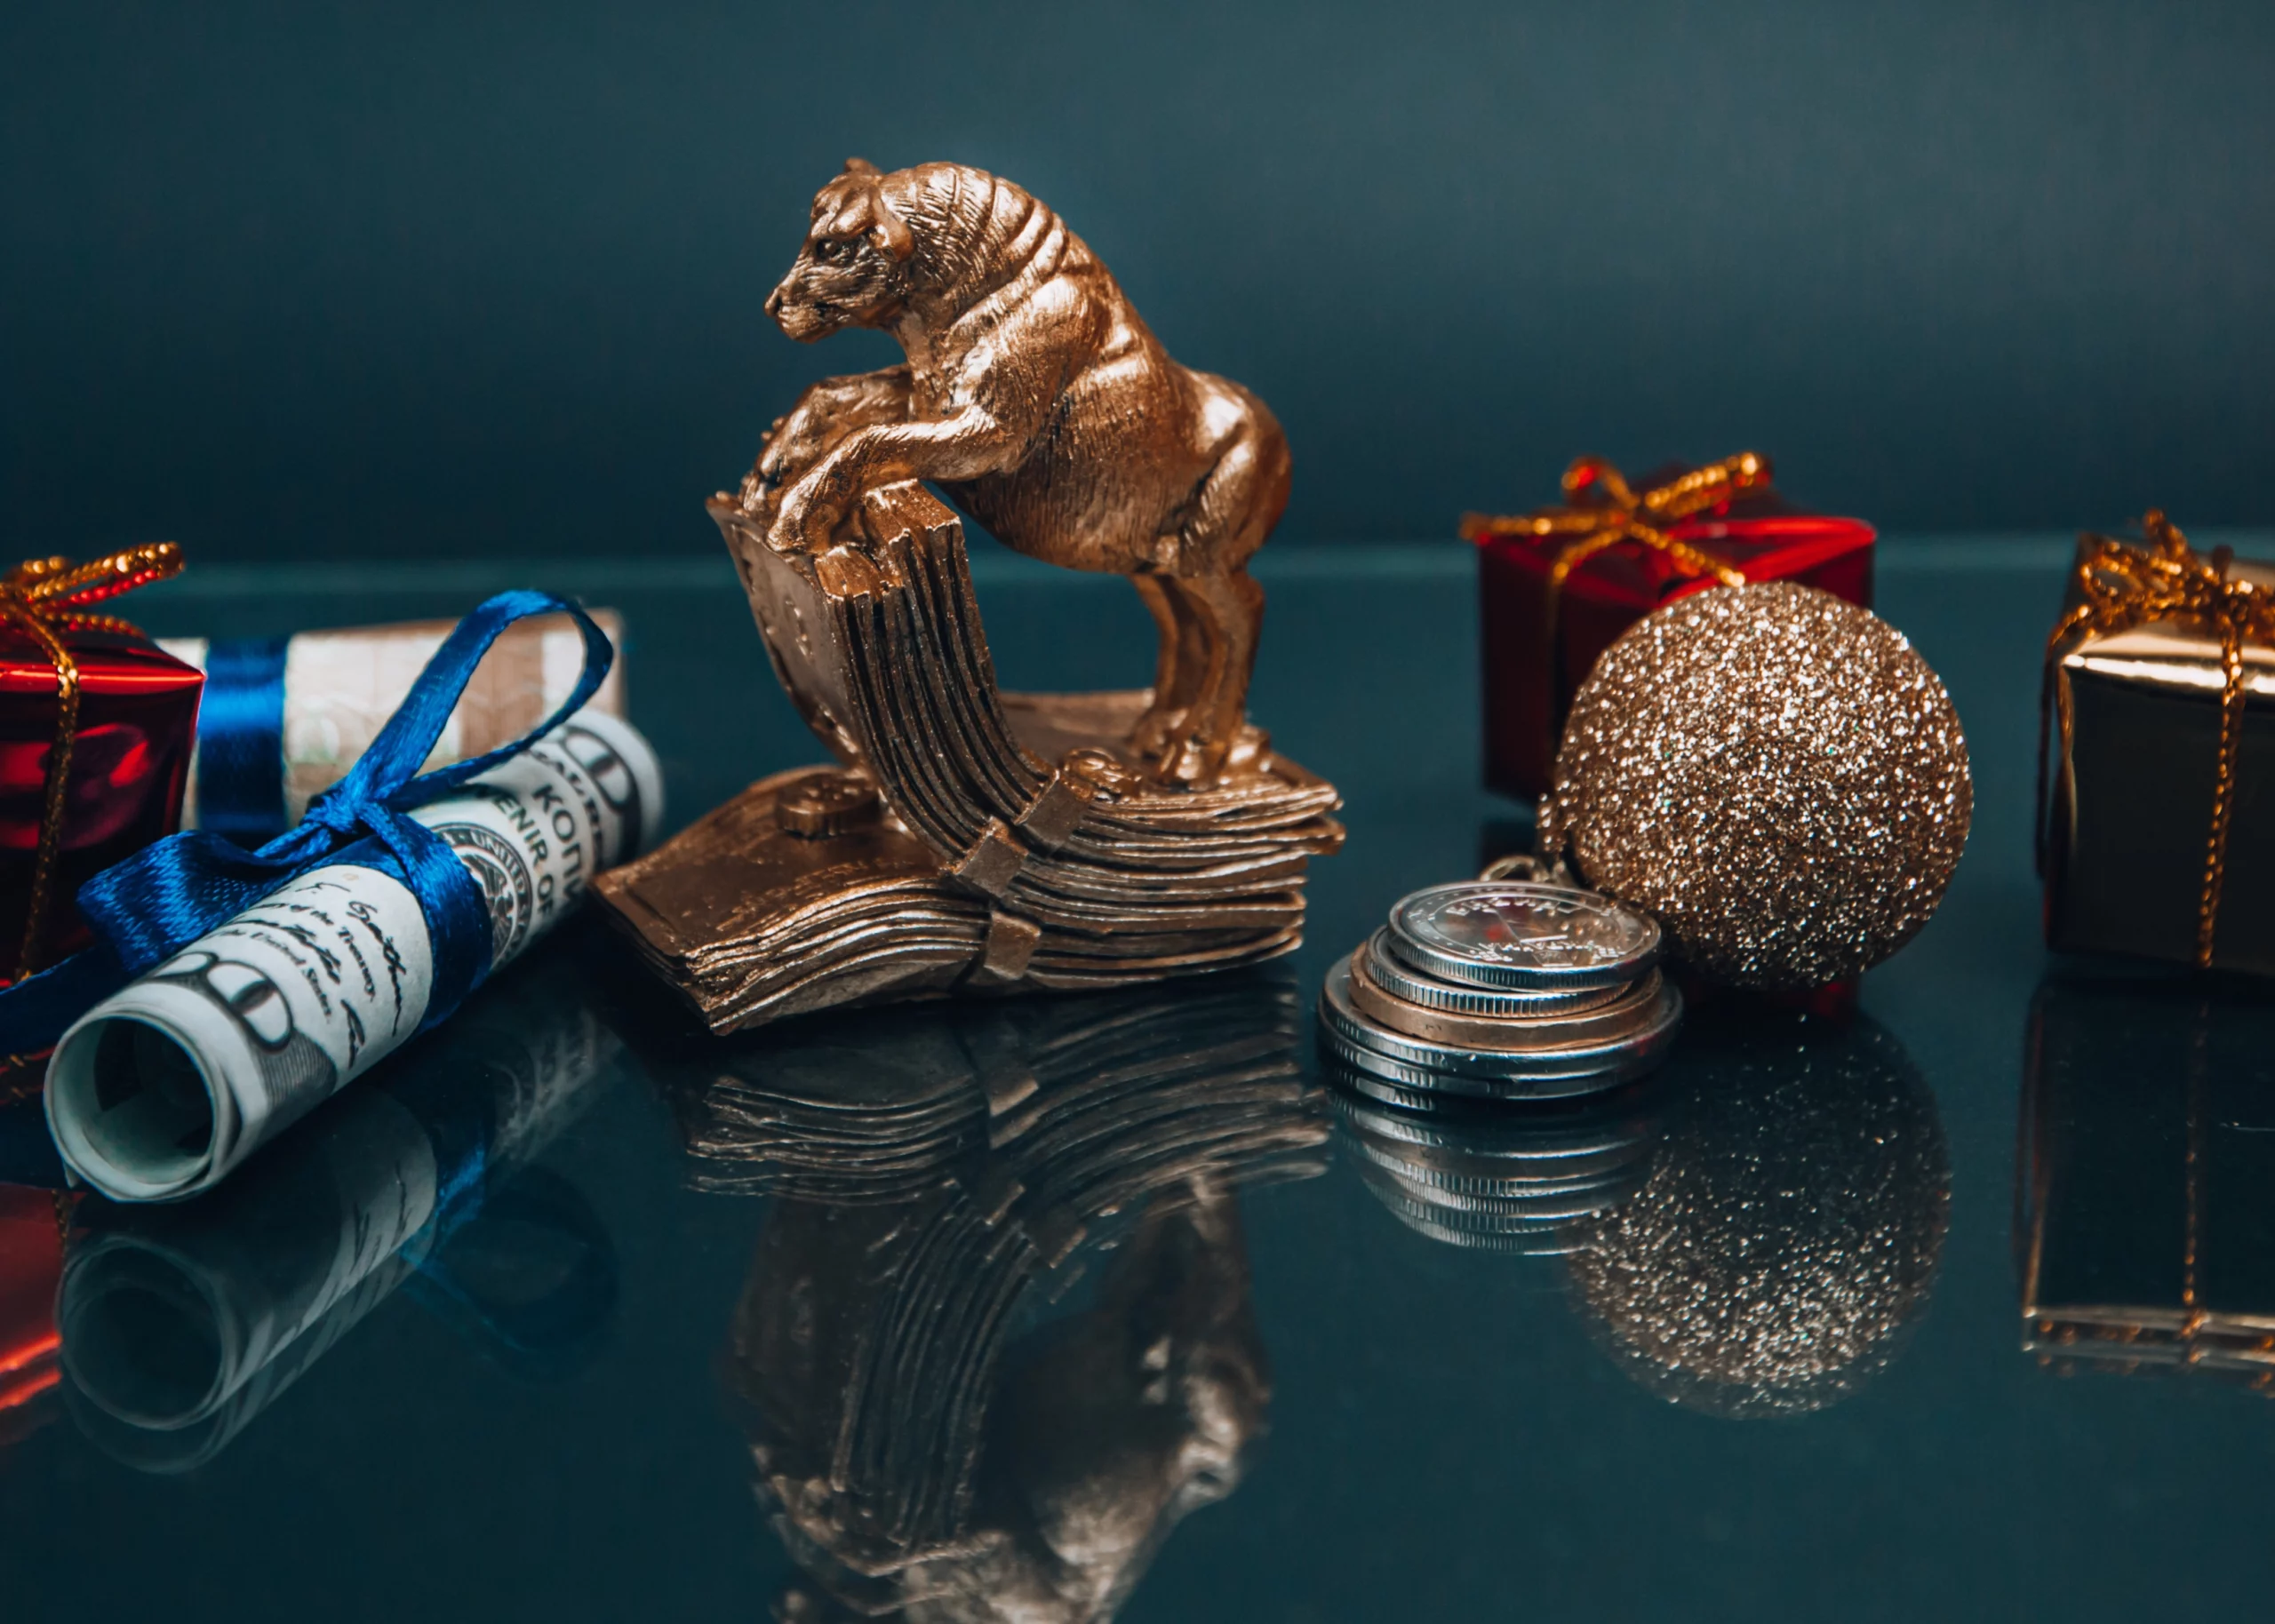 Golden ox souvenir and New Year decorations composed with dollar bills and coins